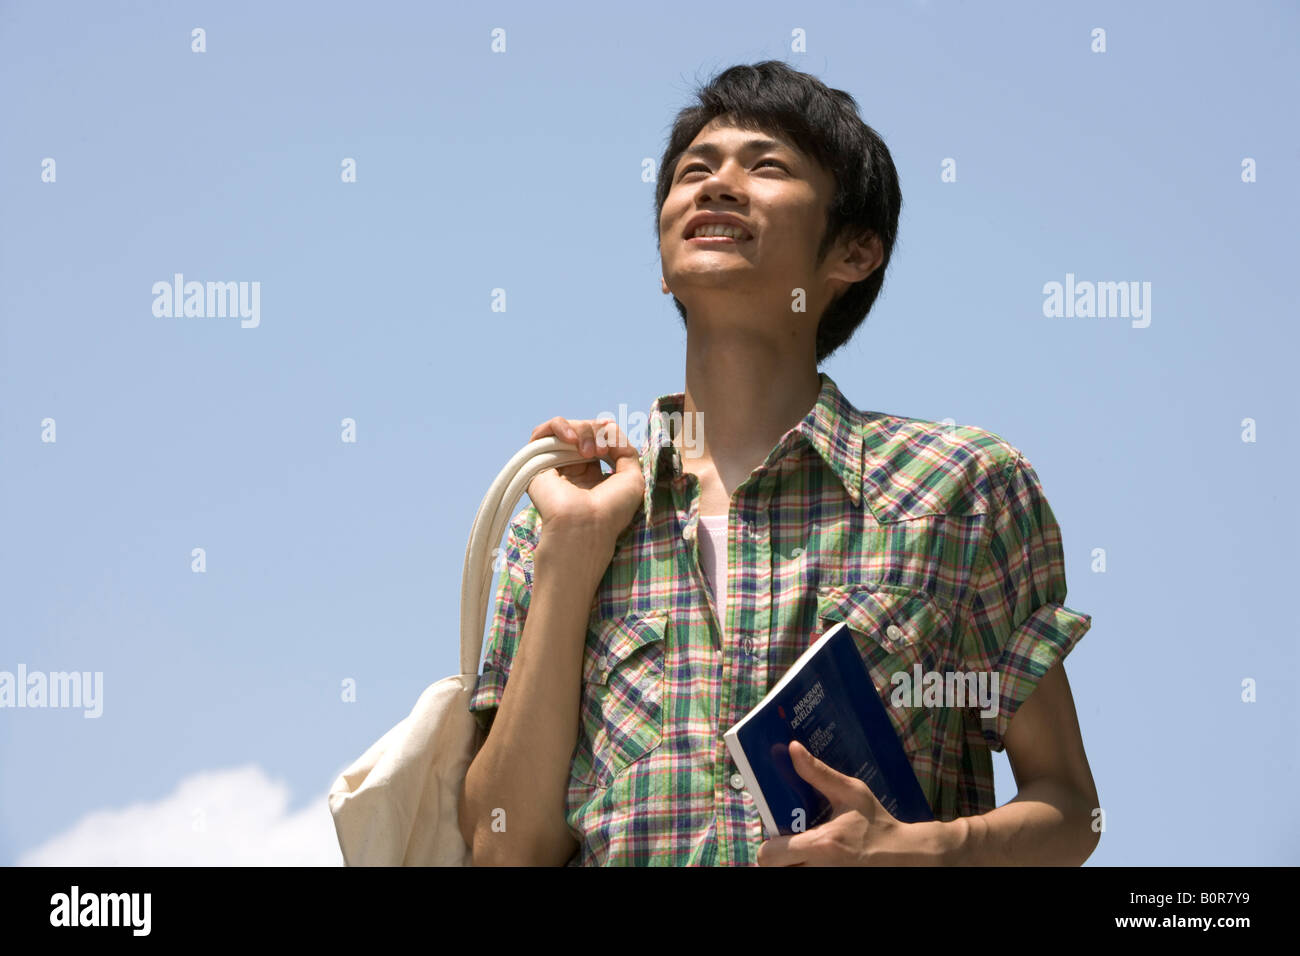 Teenage boy (16-17) standing against clear sky Banque D'Images